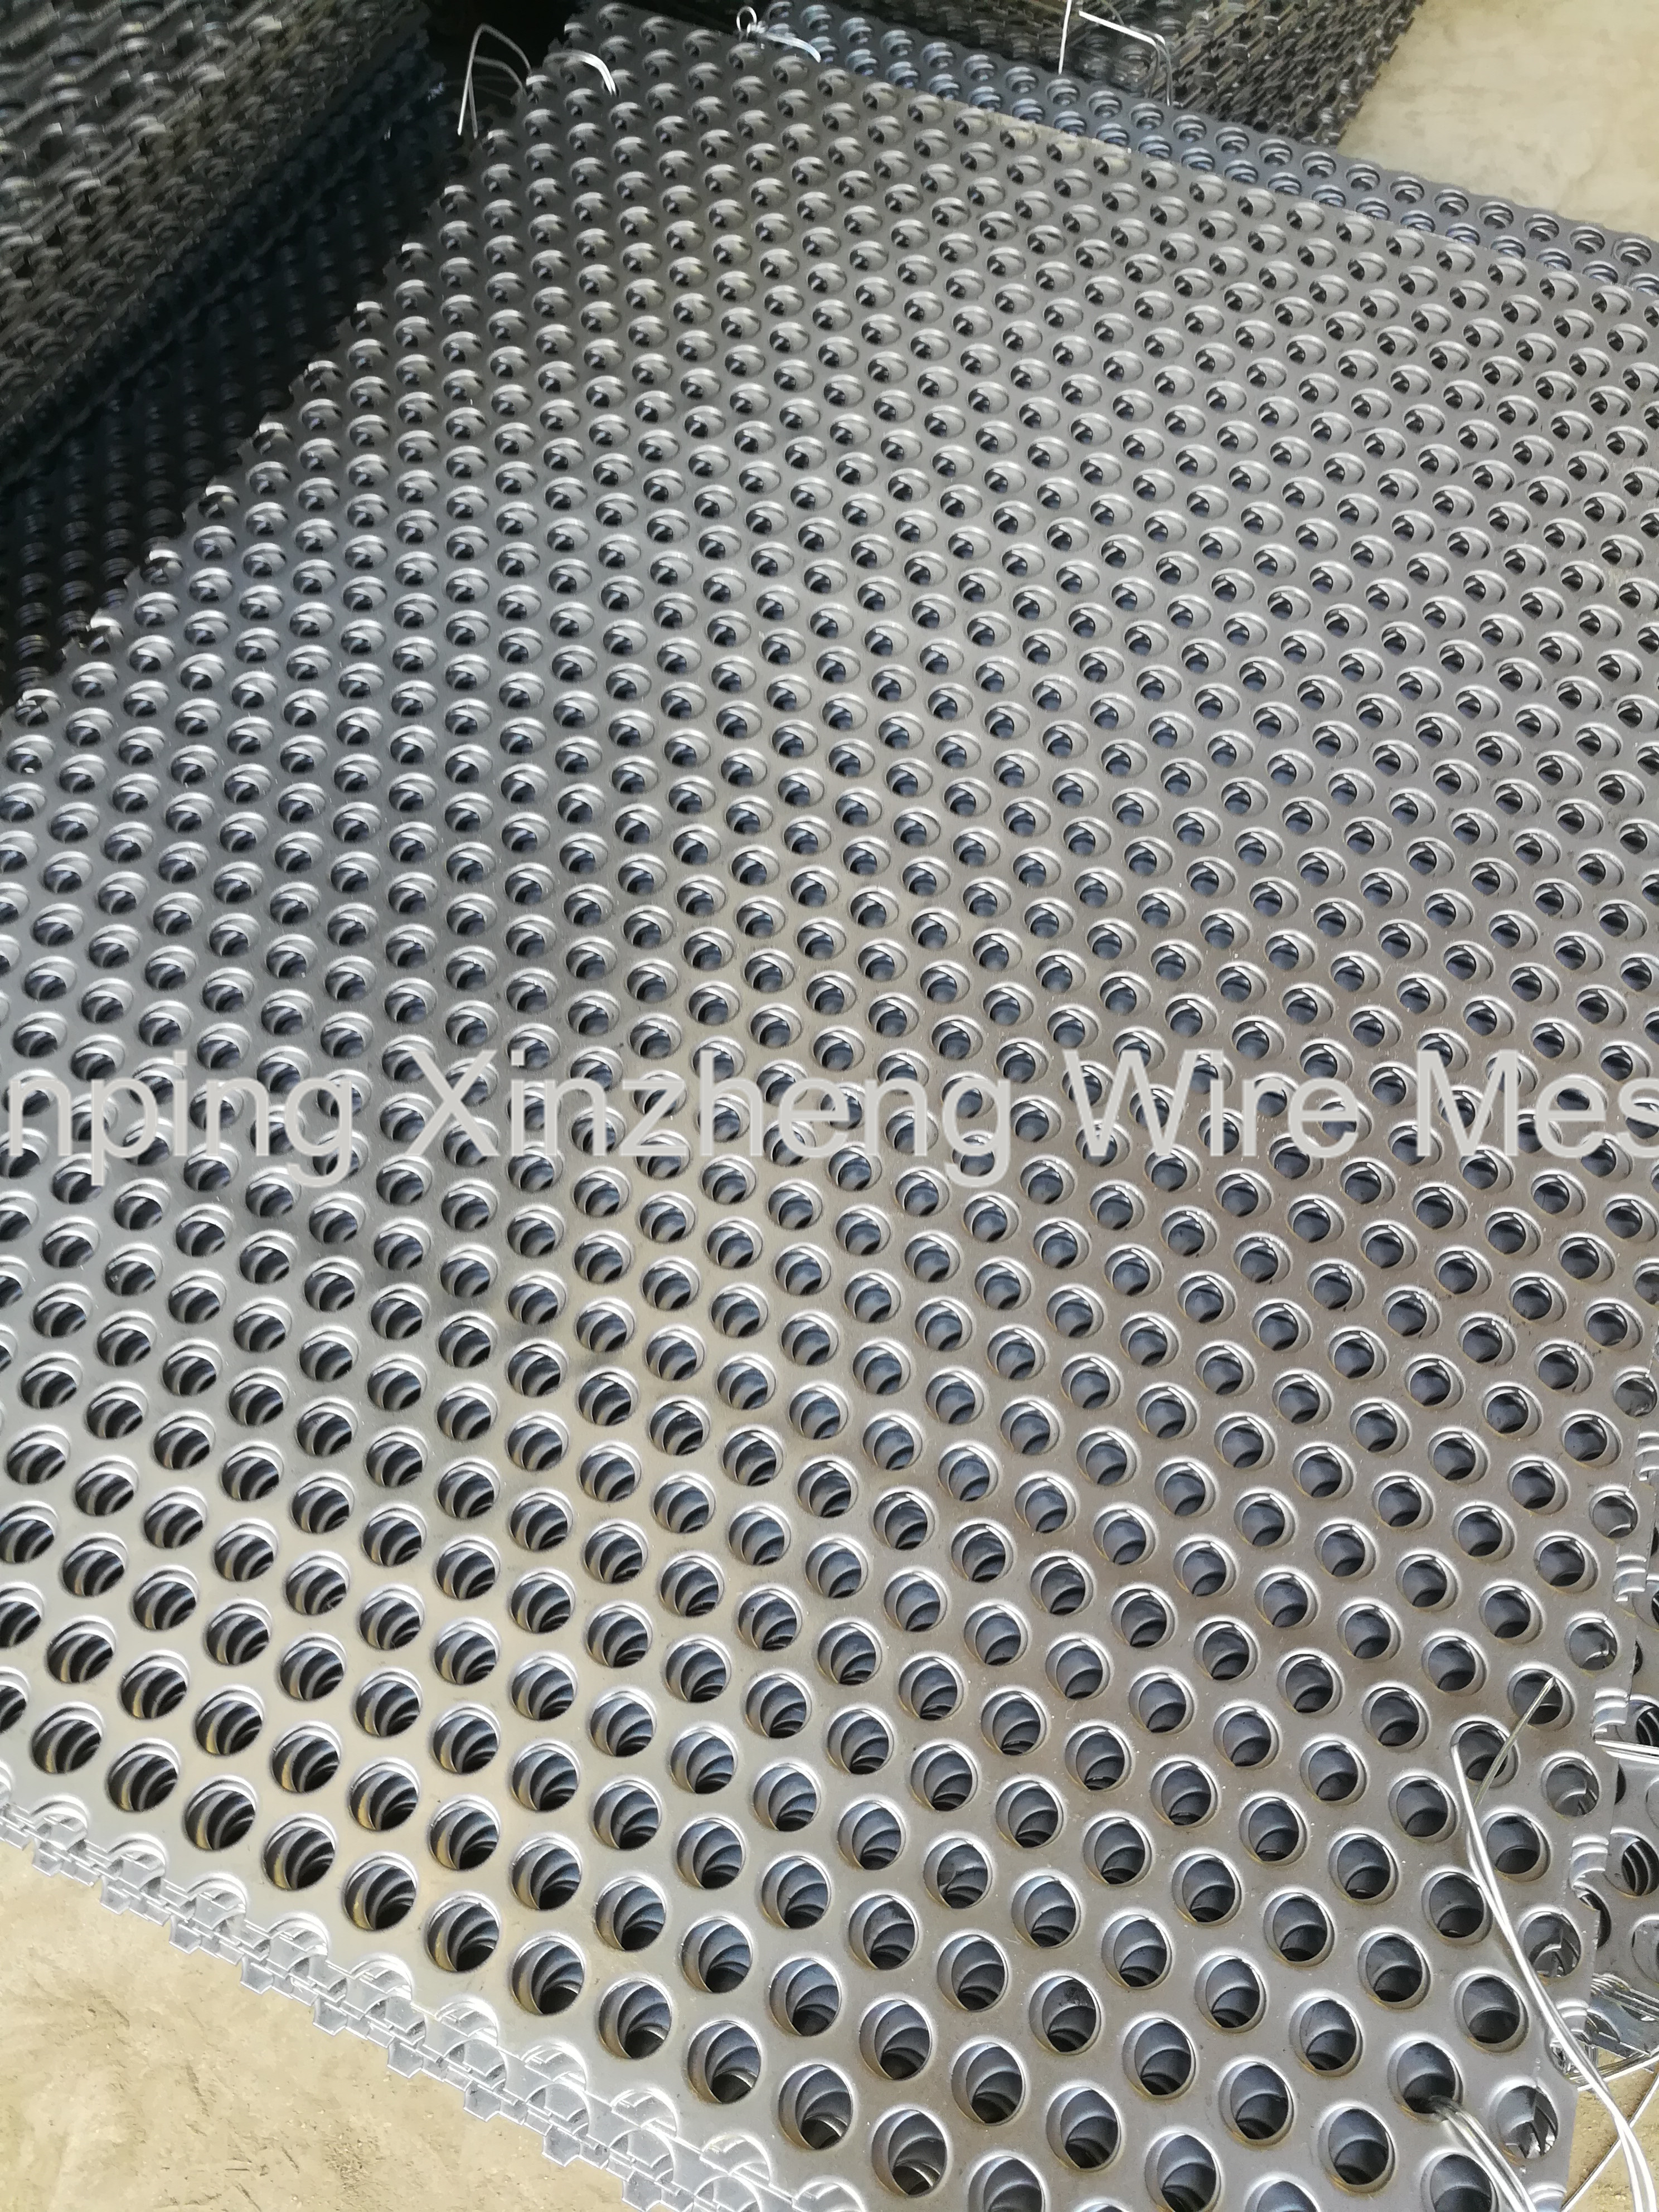 Perforated Metal Meshes